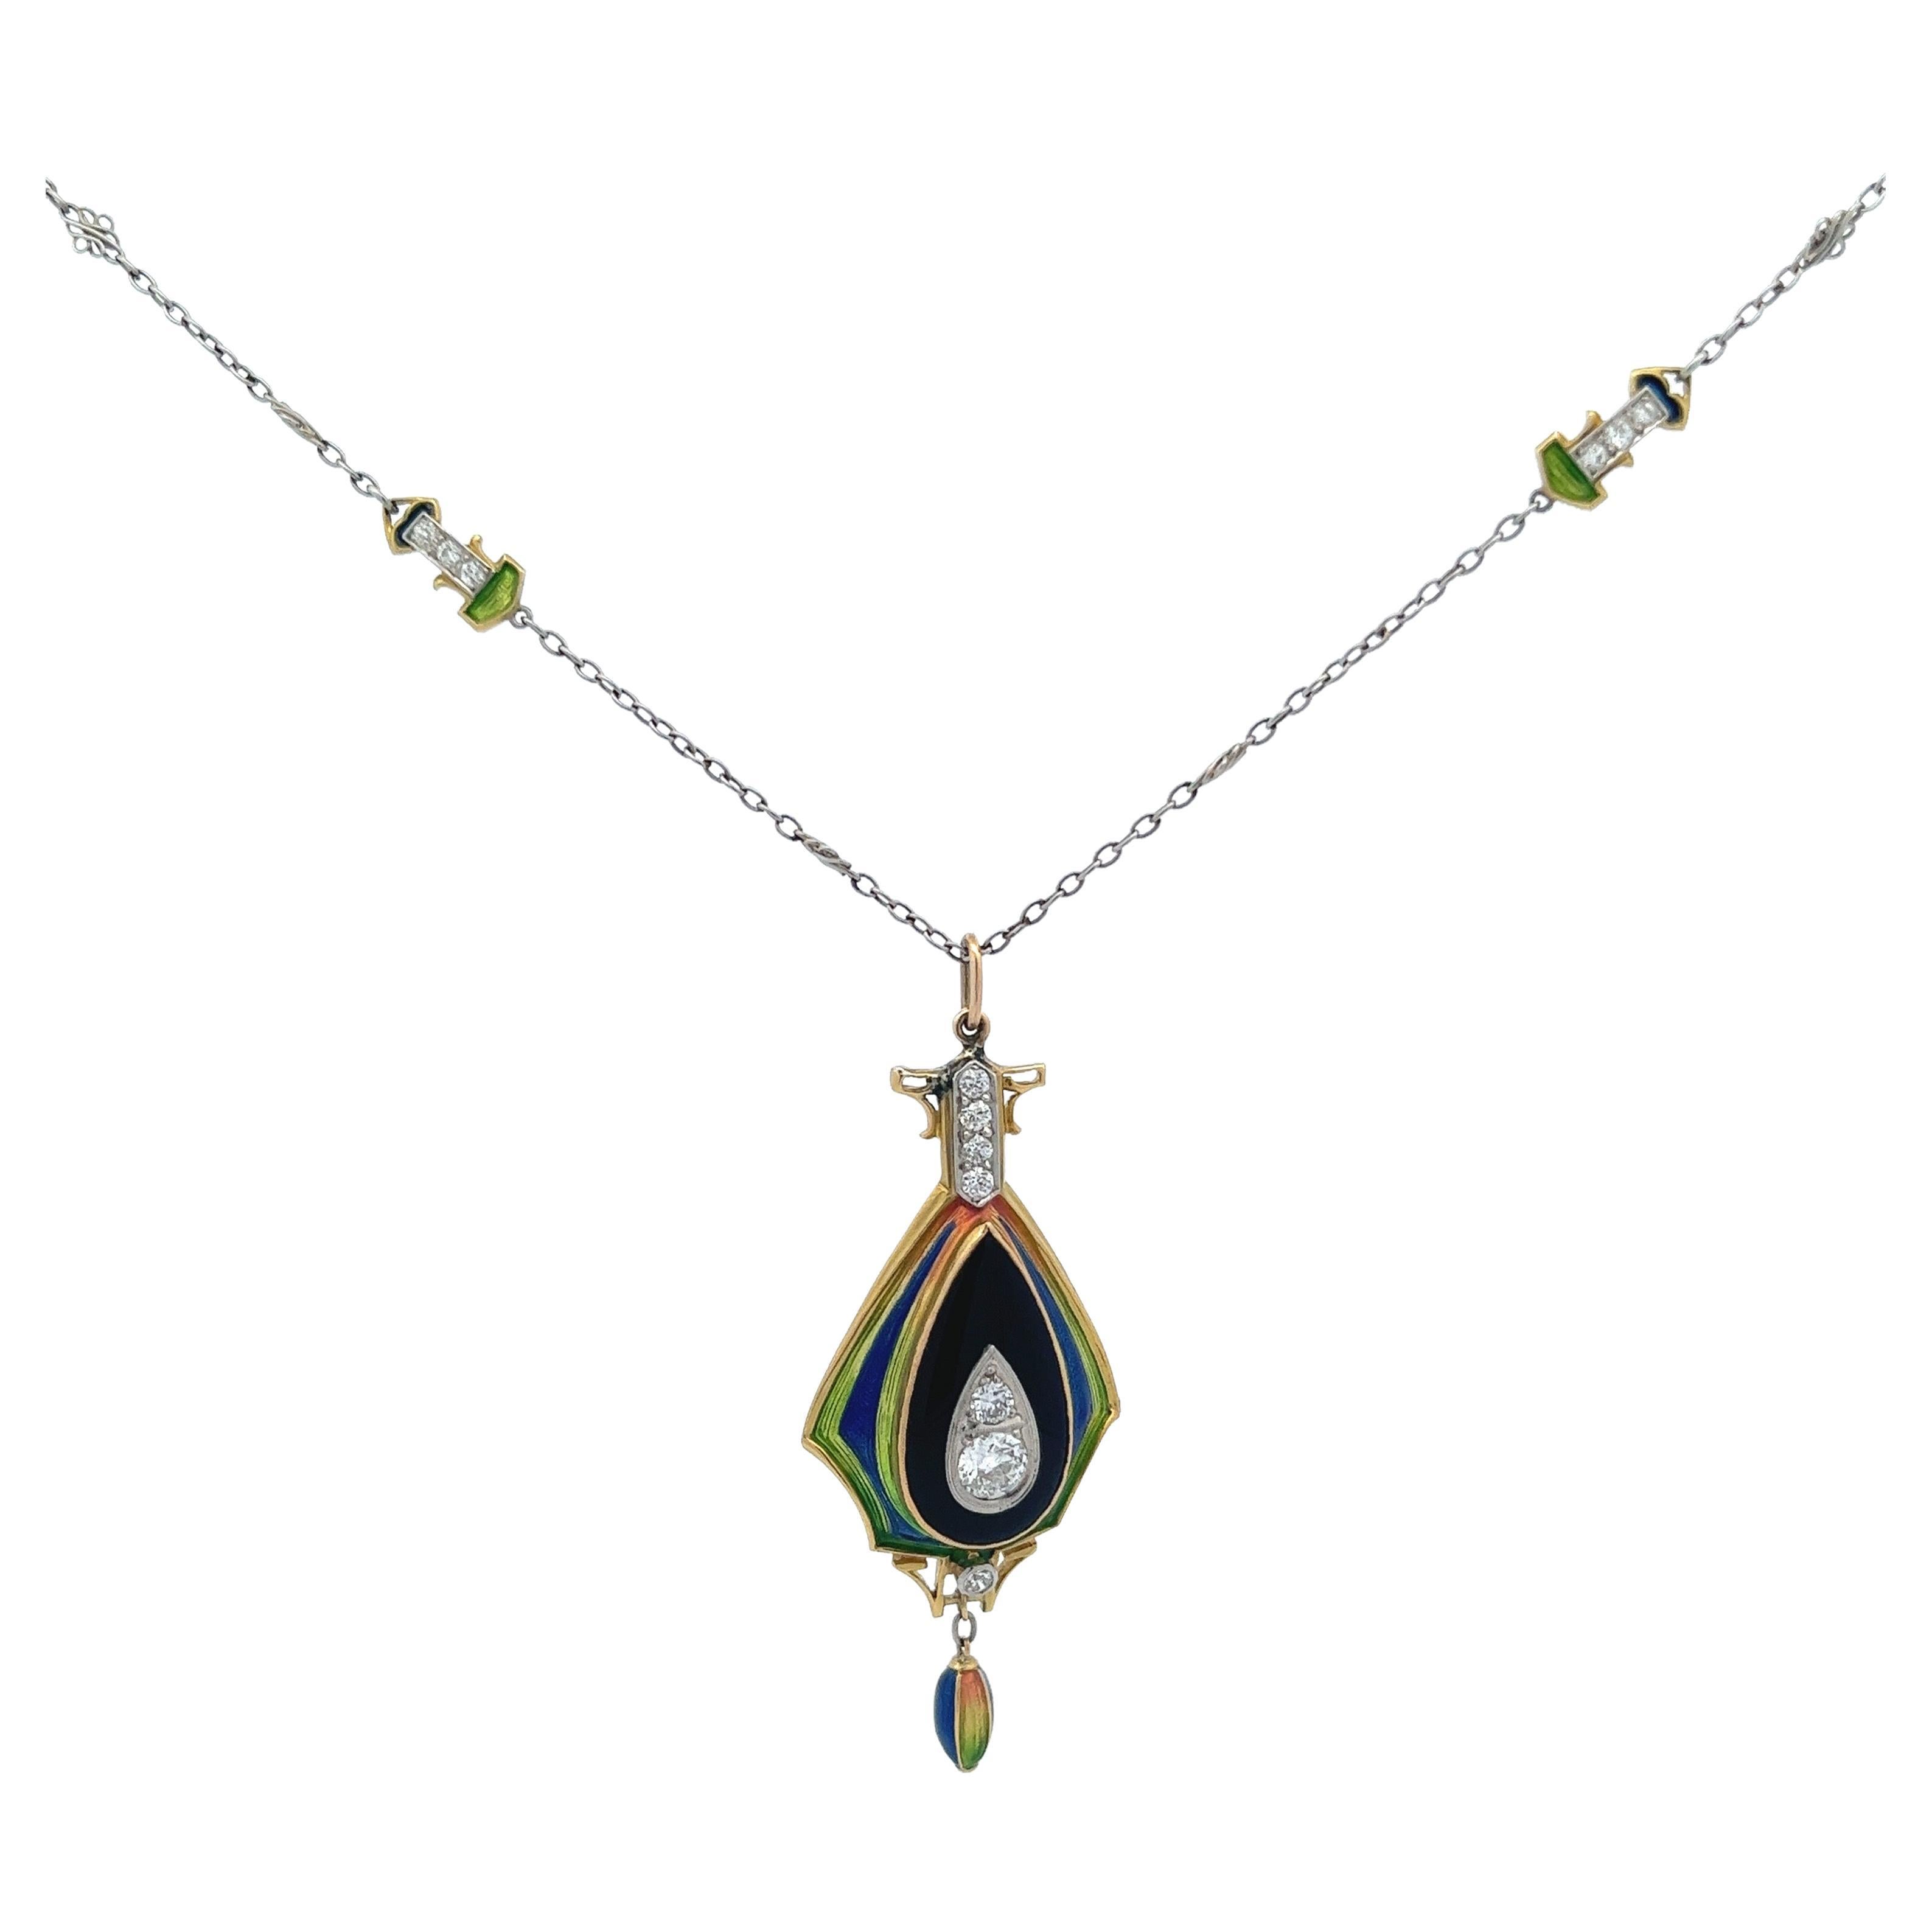 Dainty Art Nouveau matching platinum and 18 karat necklace and pendant. A beautiful blend of multicolor enamel, black onyx, and diamonds covering the essentials of the art nouveau time period. Special to this necklace, the enamel is nearly perfect